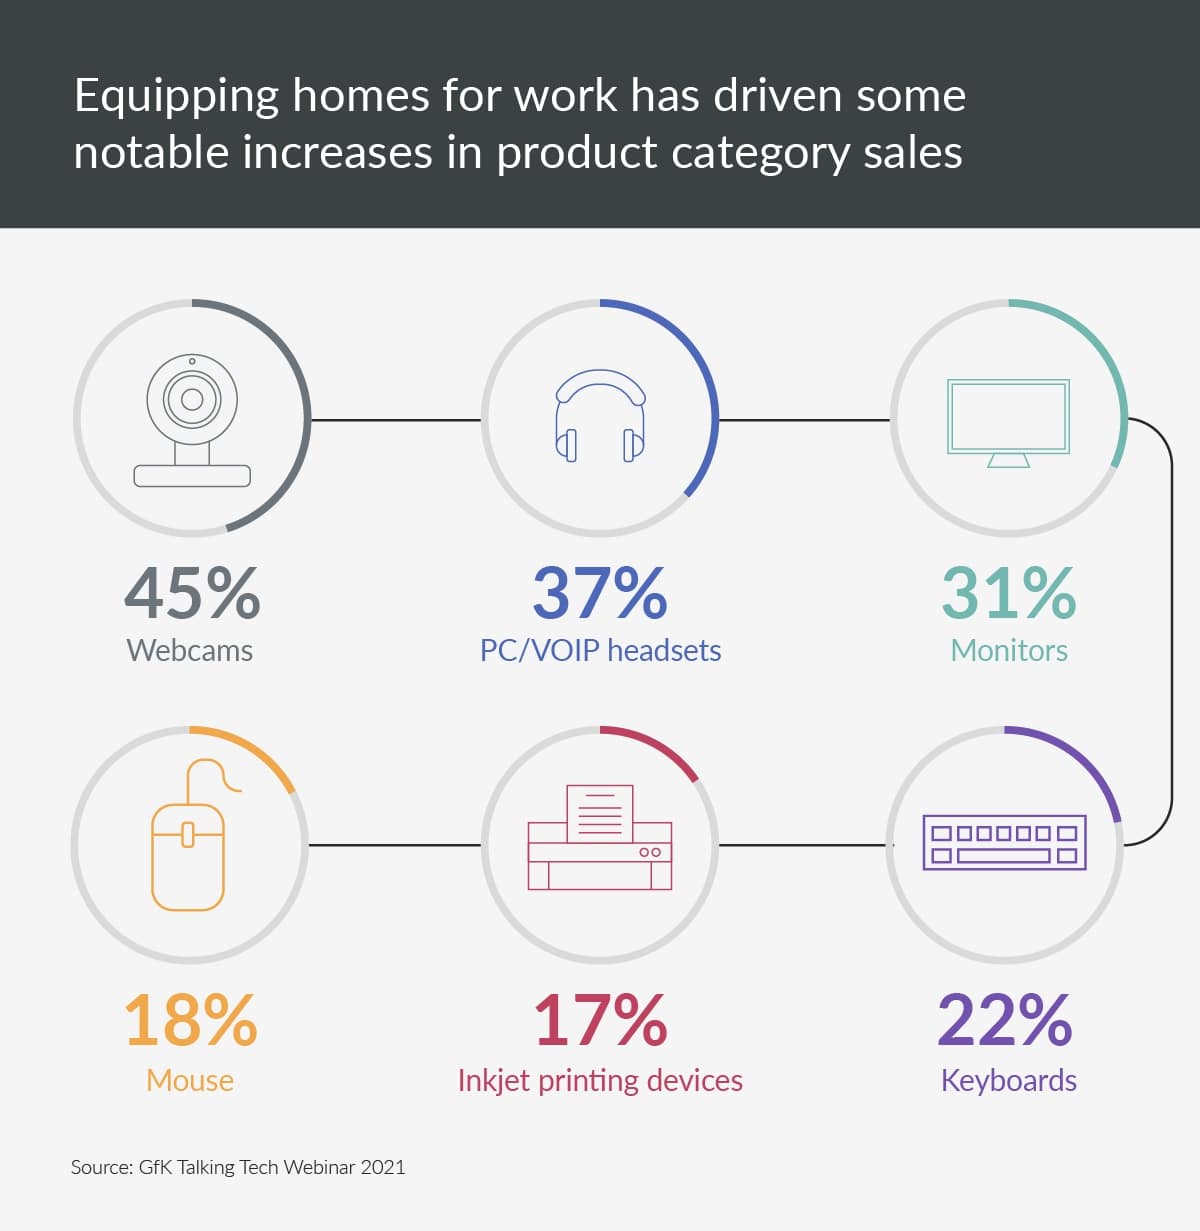 GfK data showing sales increases for work-from-home-related products